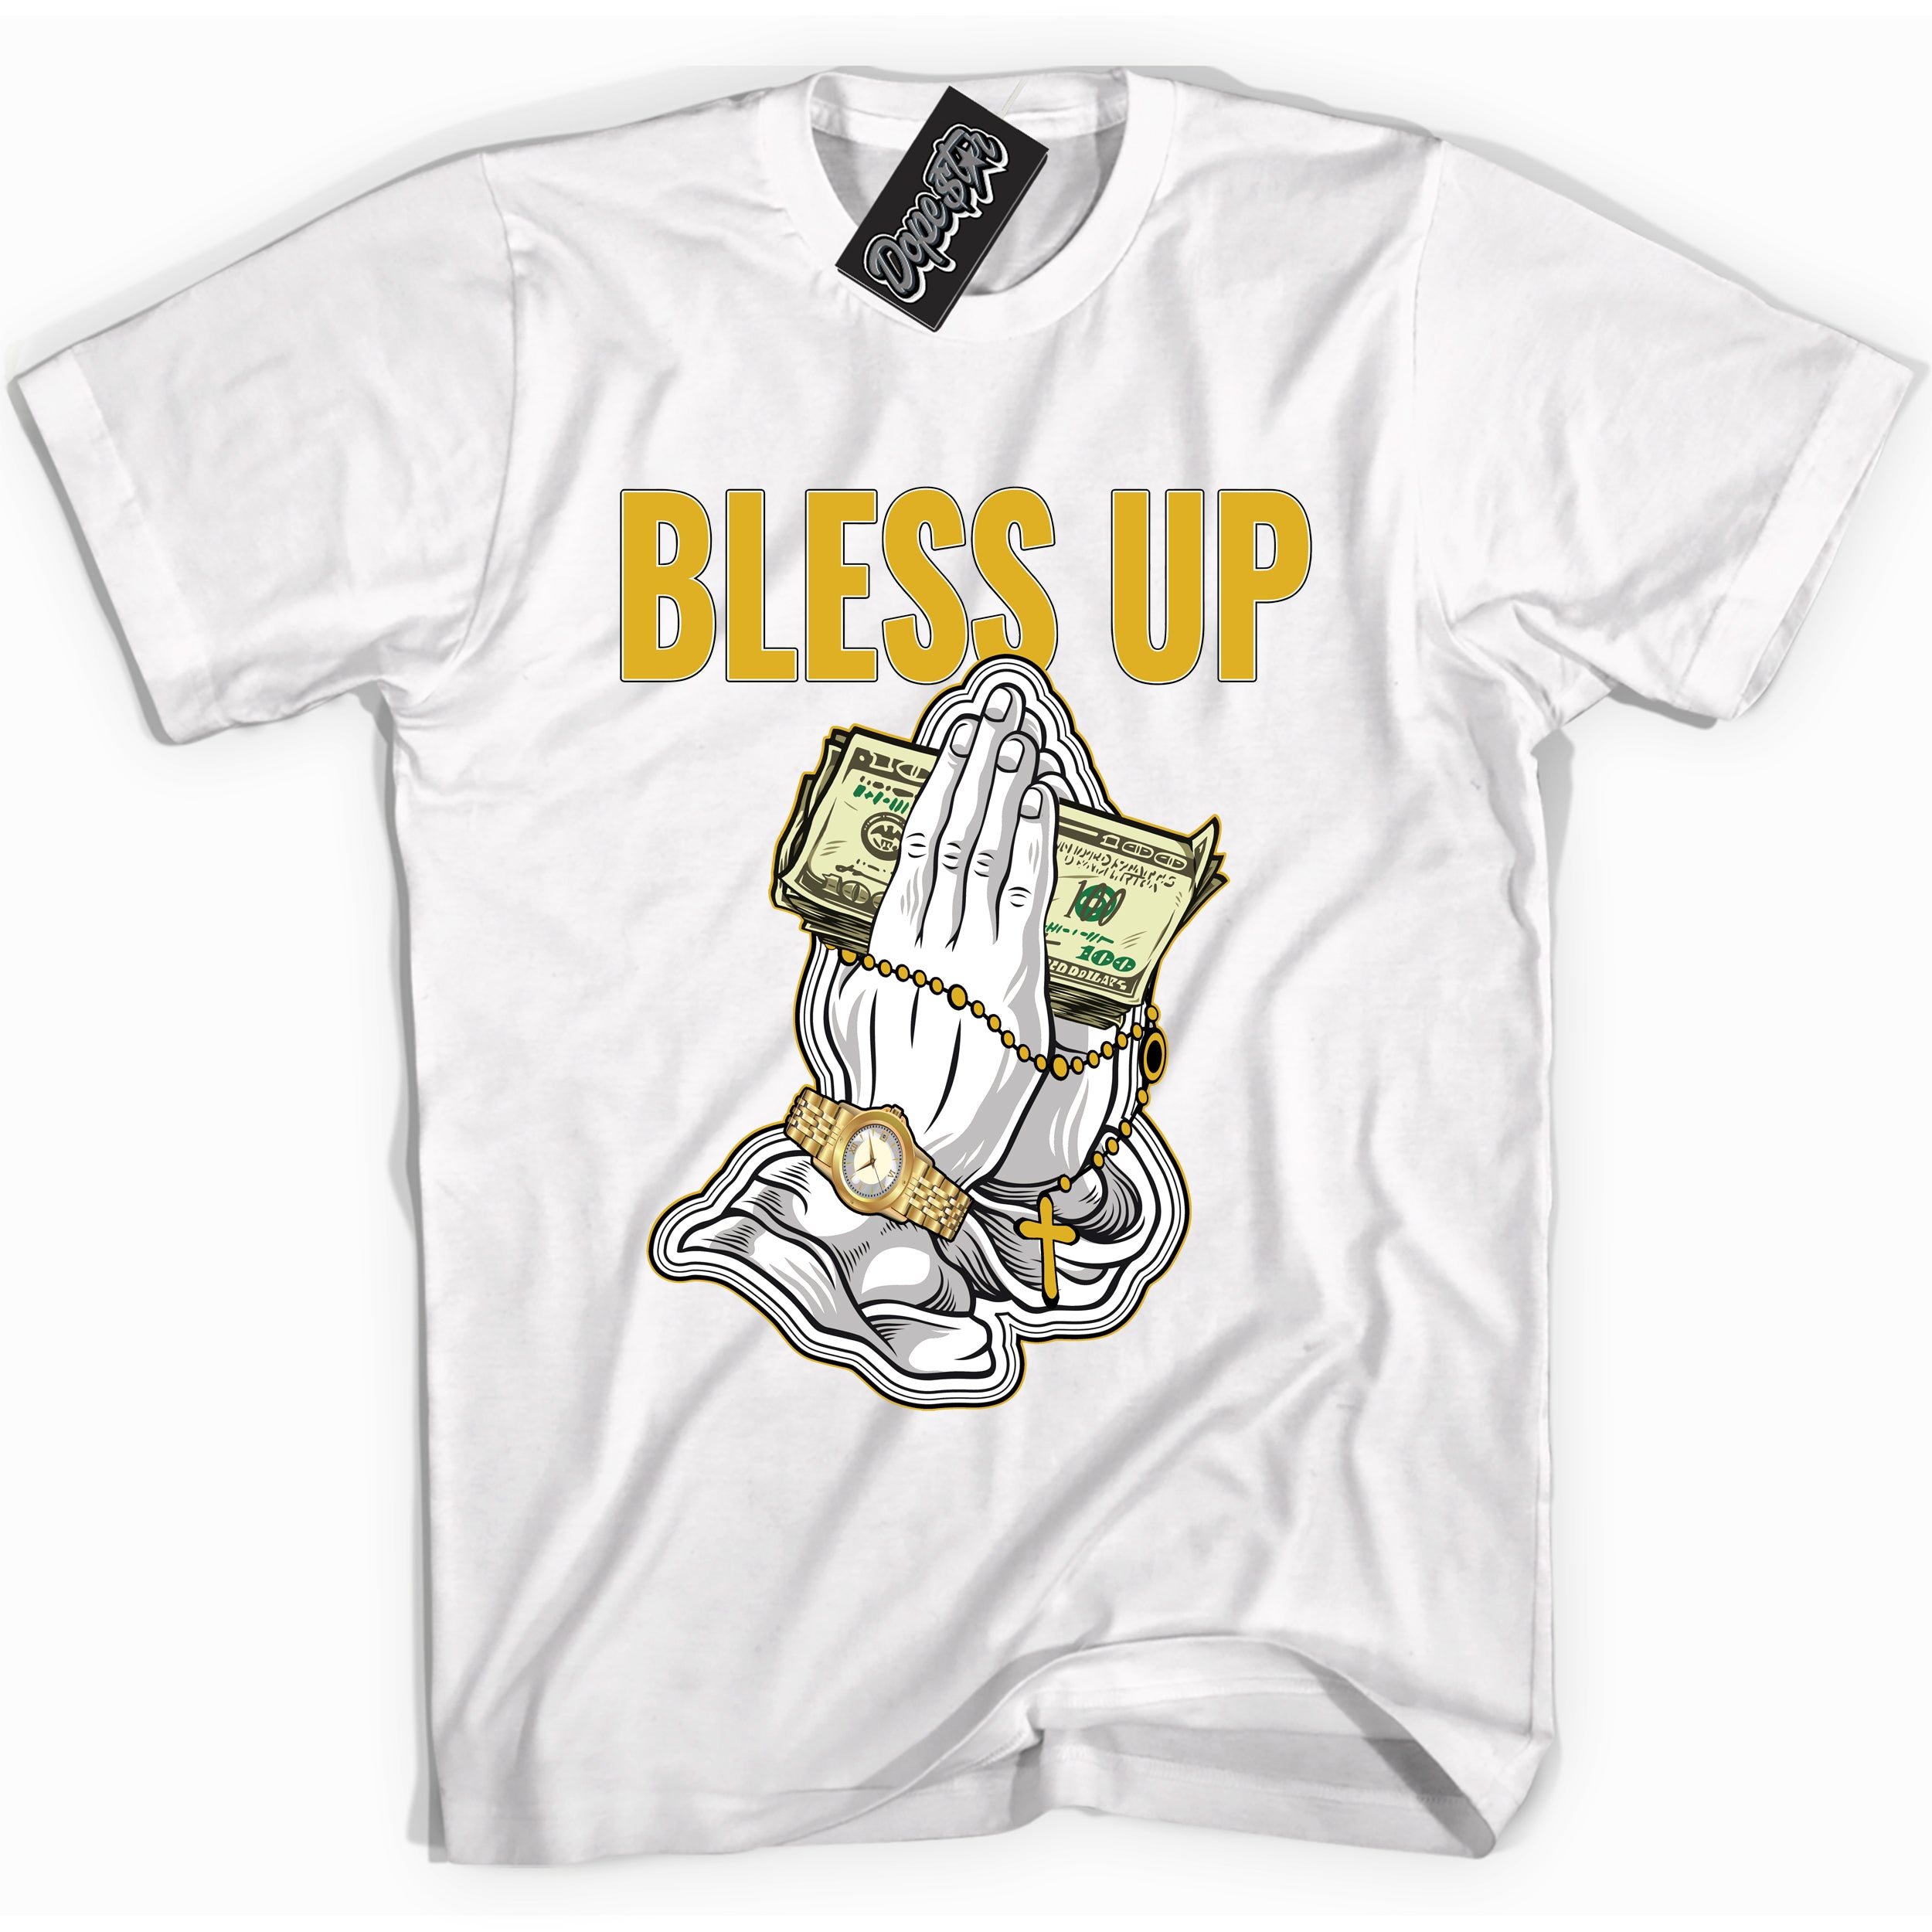 Cool White Shirt with “ Bless Up” design that perfectly matches Yellow Ochre 6s Sneakers.